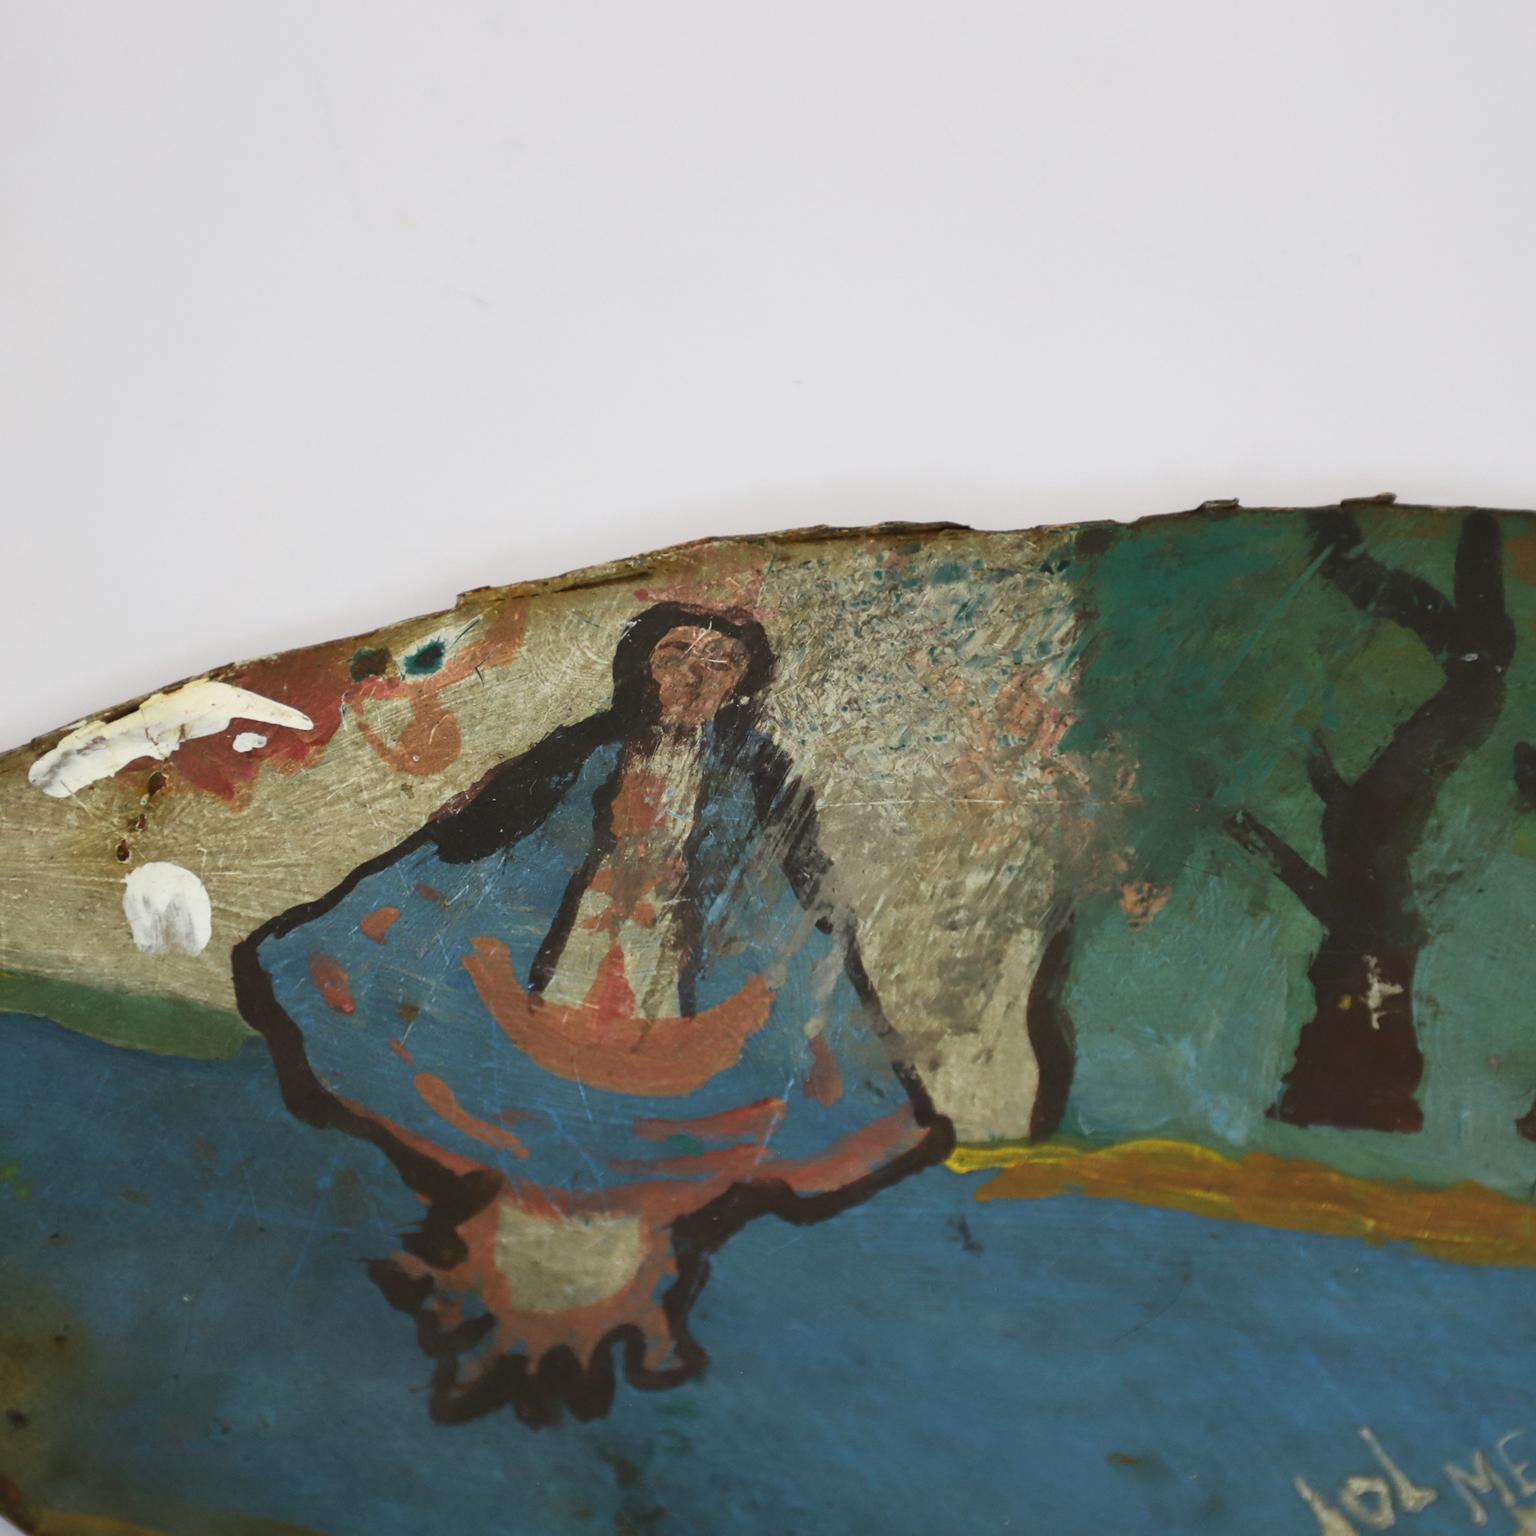 Circa 1950.We offer this original exvoto.

Votive paintings in Mexico go by several names in Spanish such as “ex voto,” “retablo” or “lámina,” which refer to their purpose, place often found, or material from which they are traditionally made